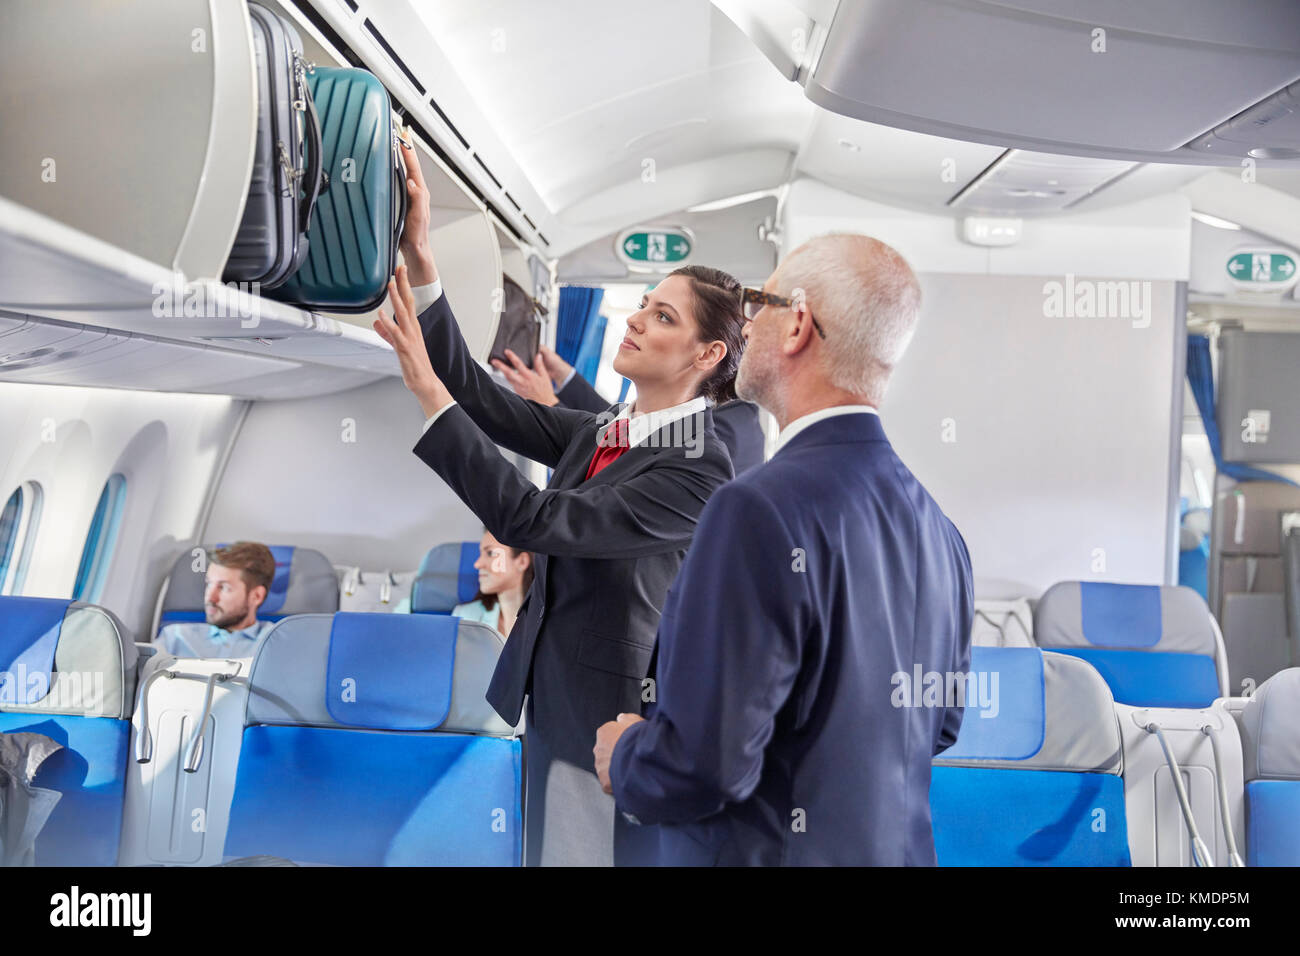 Flight attendant helping businessman place luggage in overhead compartment on airplane Stock Photo